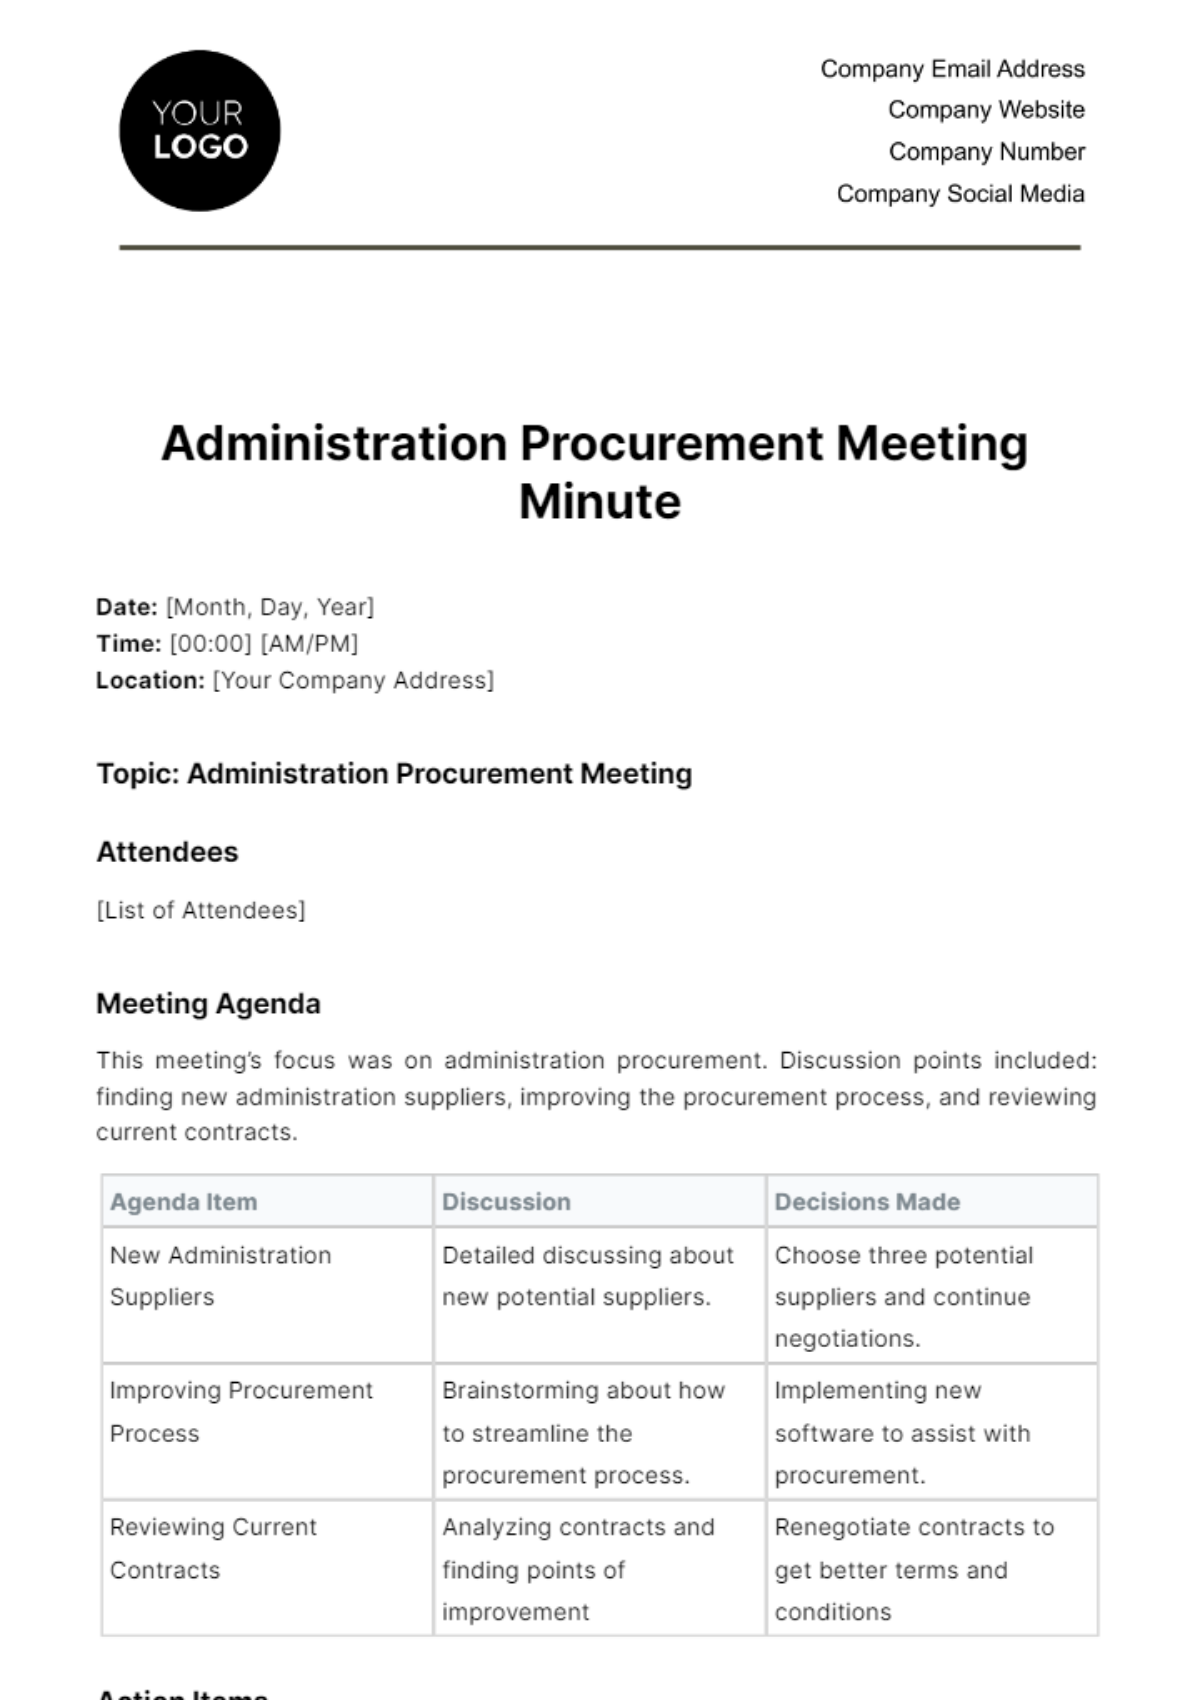 Free Administration Procurement Meeting Minute Template